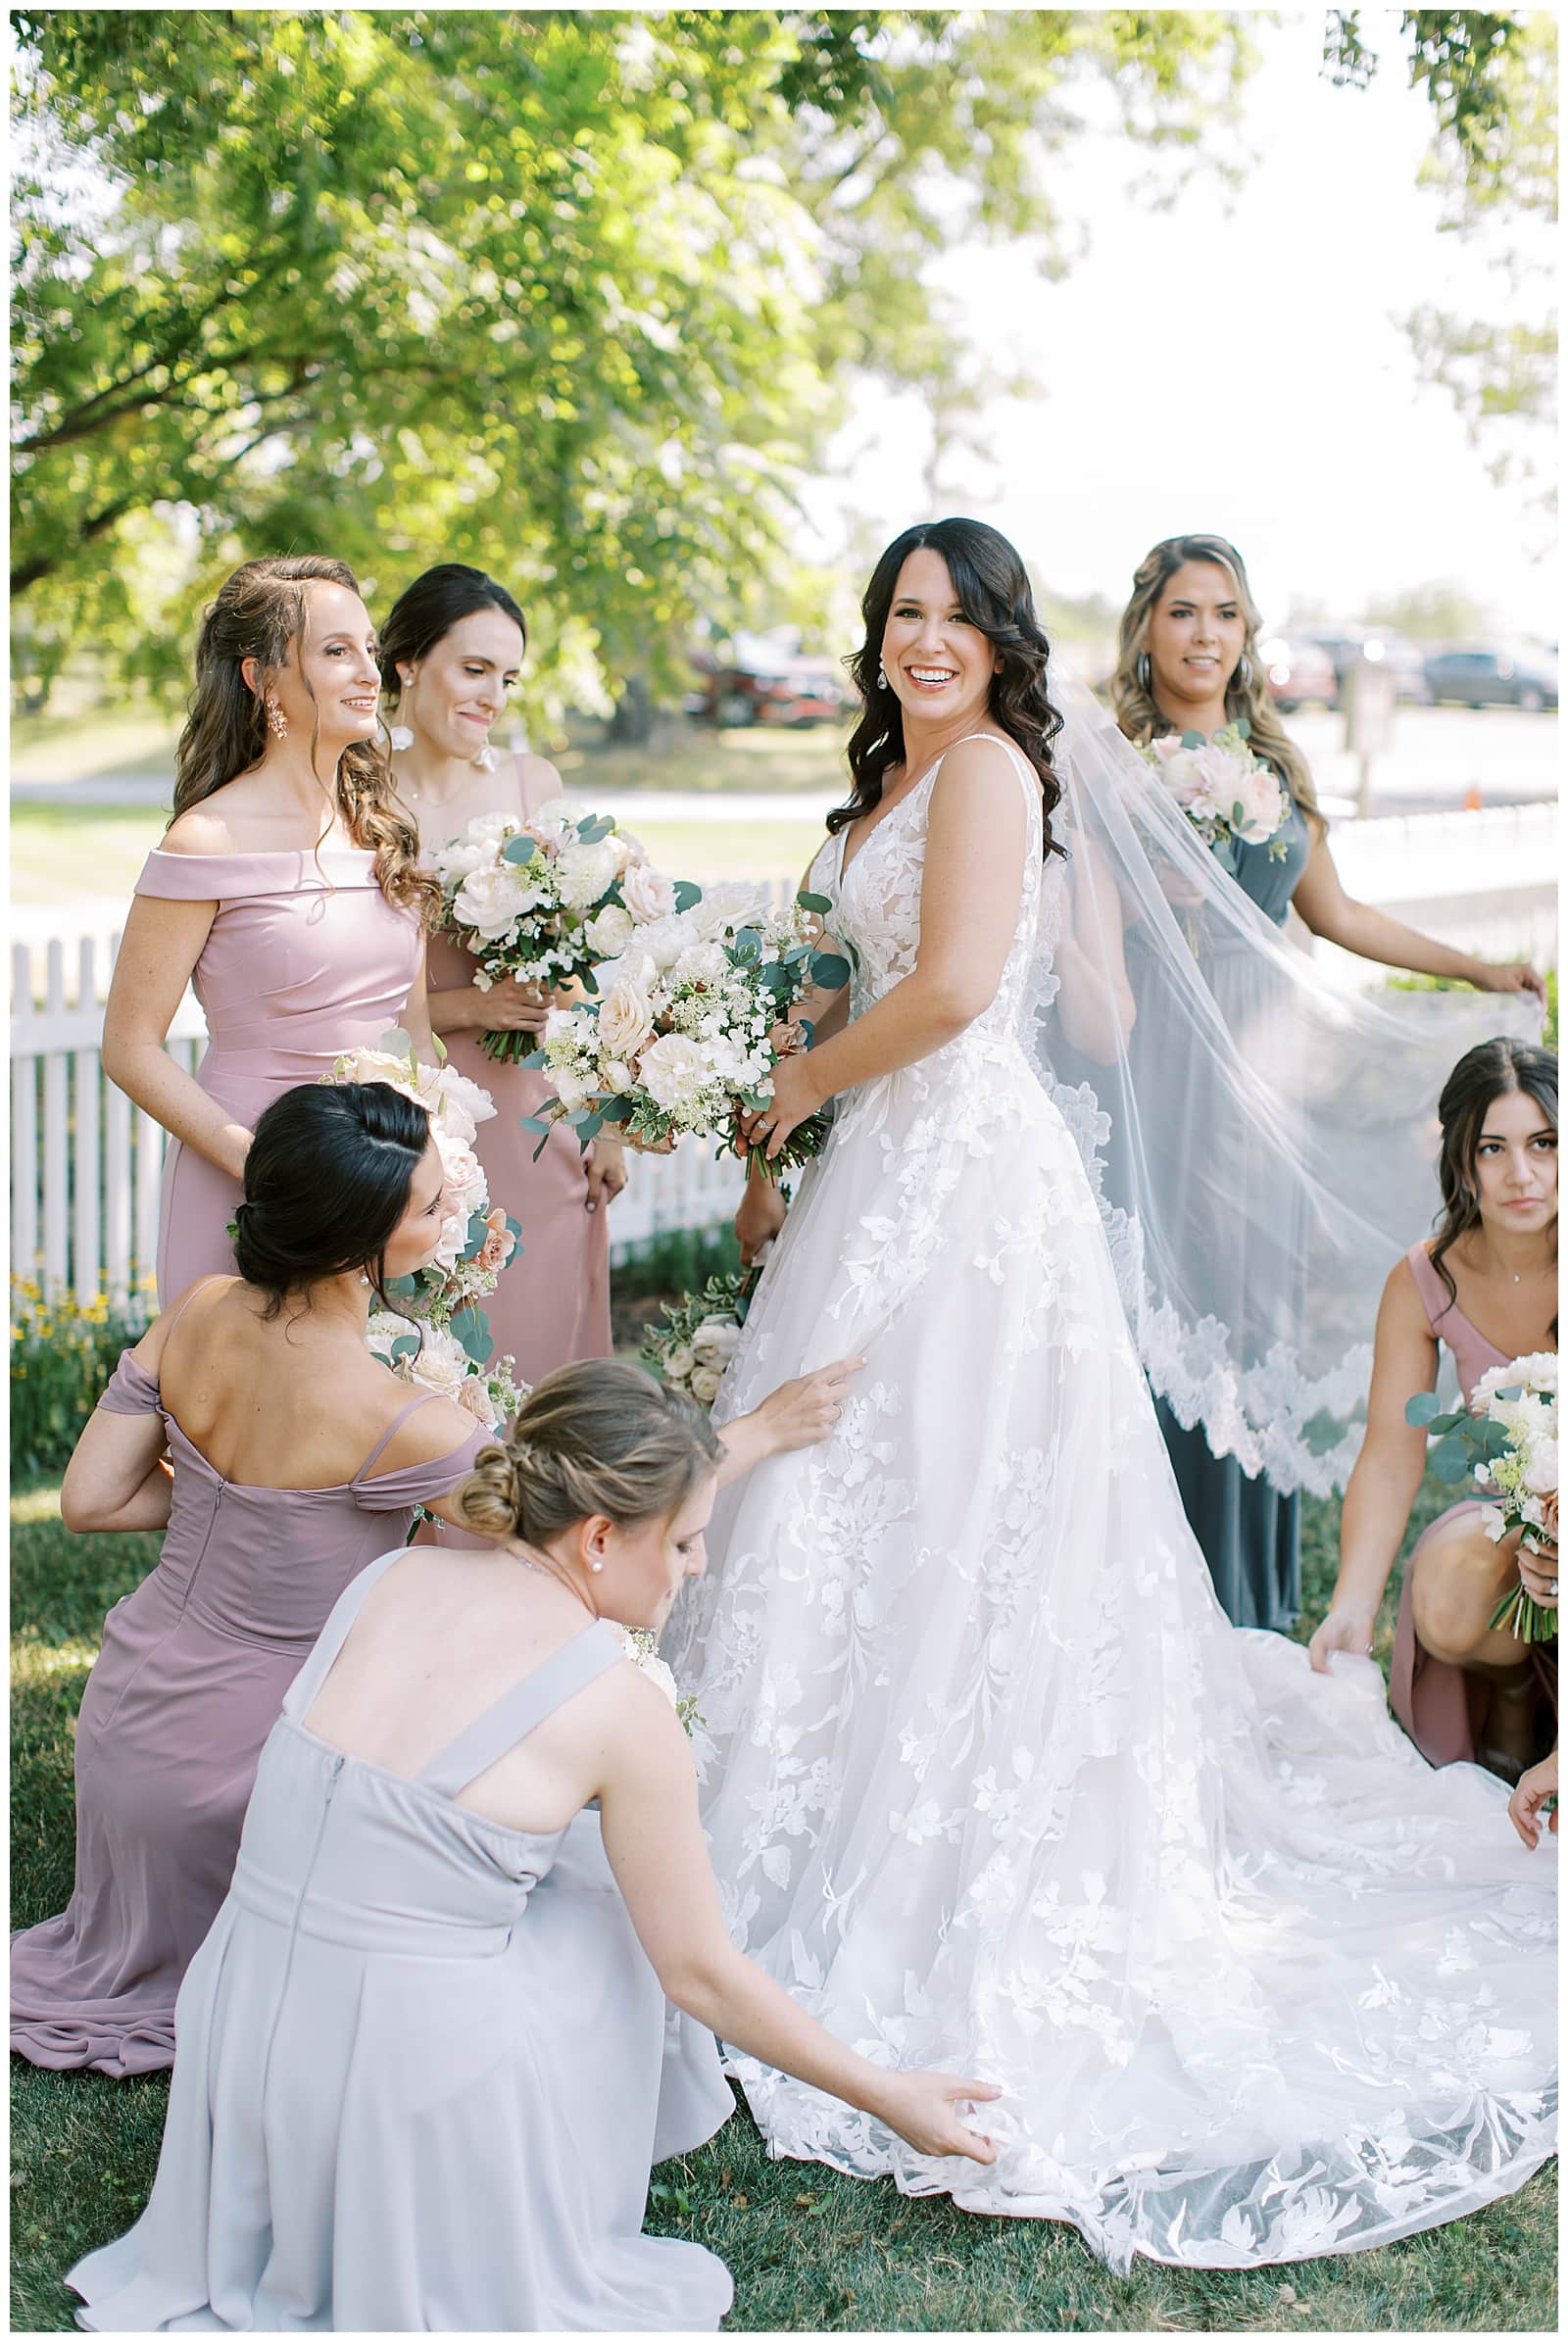 Bride getting dressed with her bridesmaids on her wedding day at Stone Tower Winery